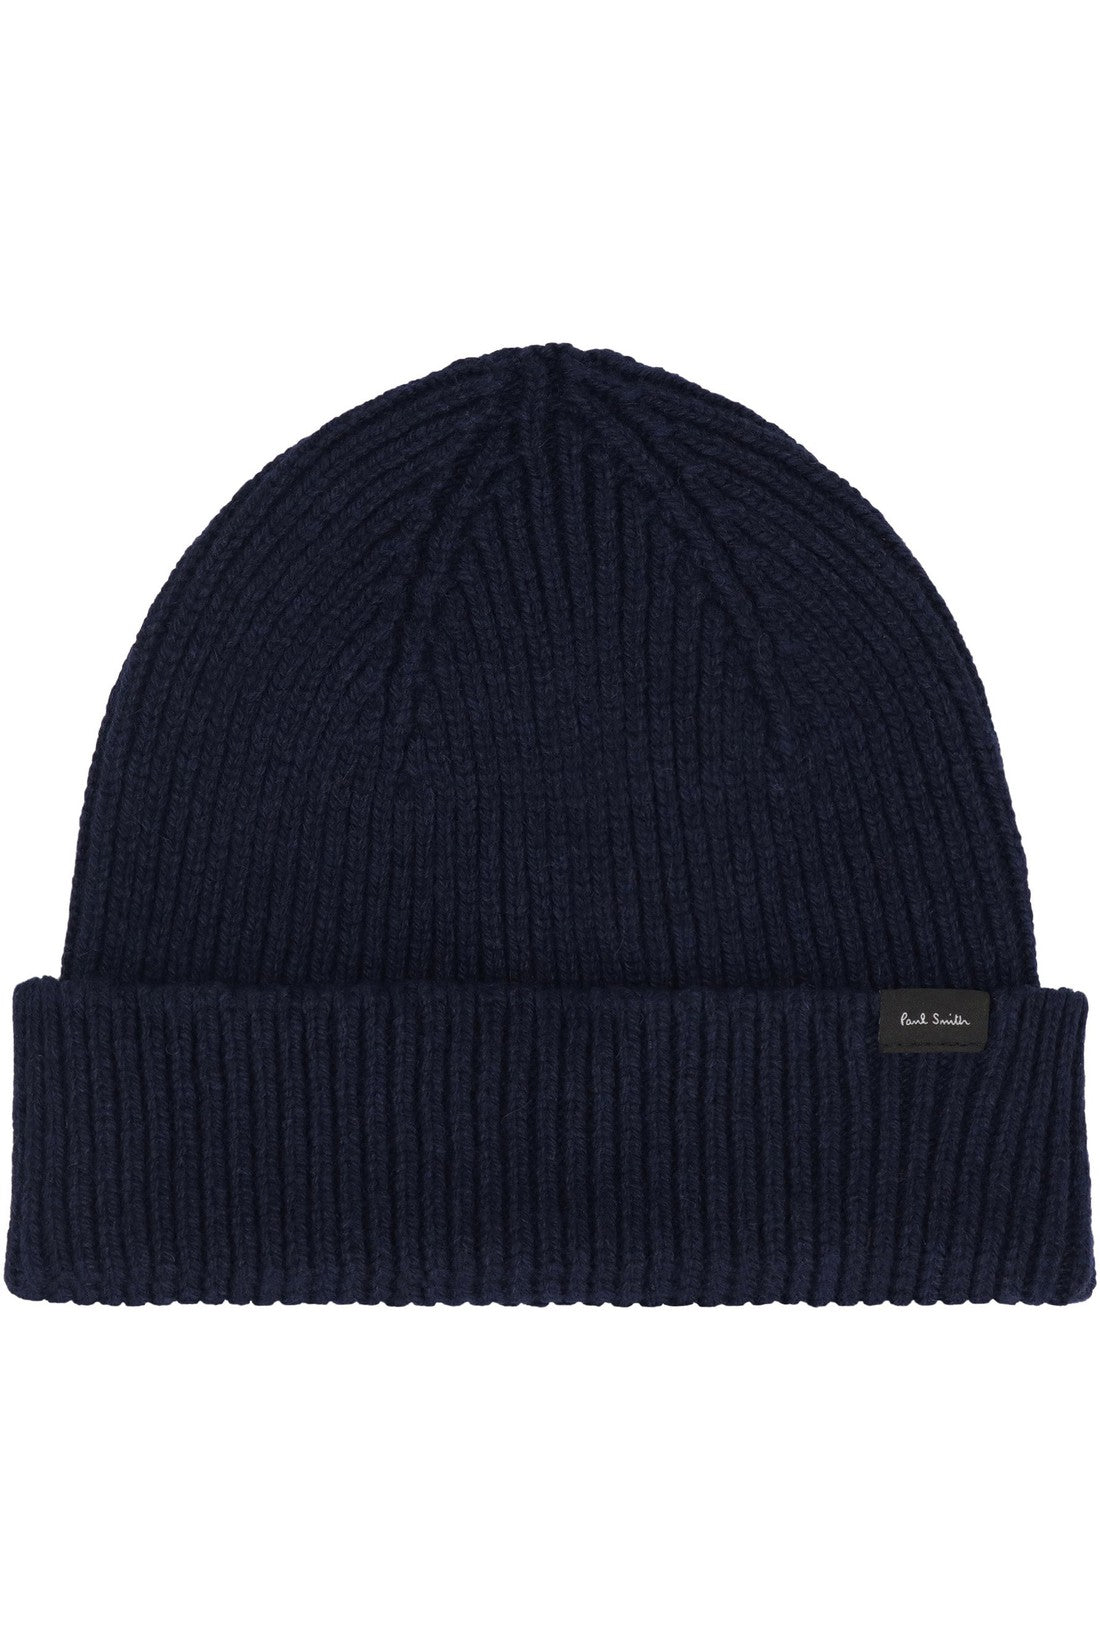 Paul Smith-OUTLET-SALE-Wool and cashmere hat-ARCHIVIST